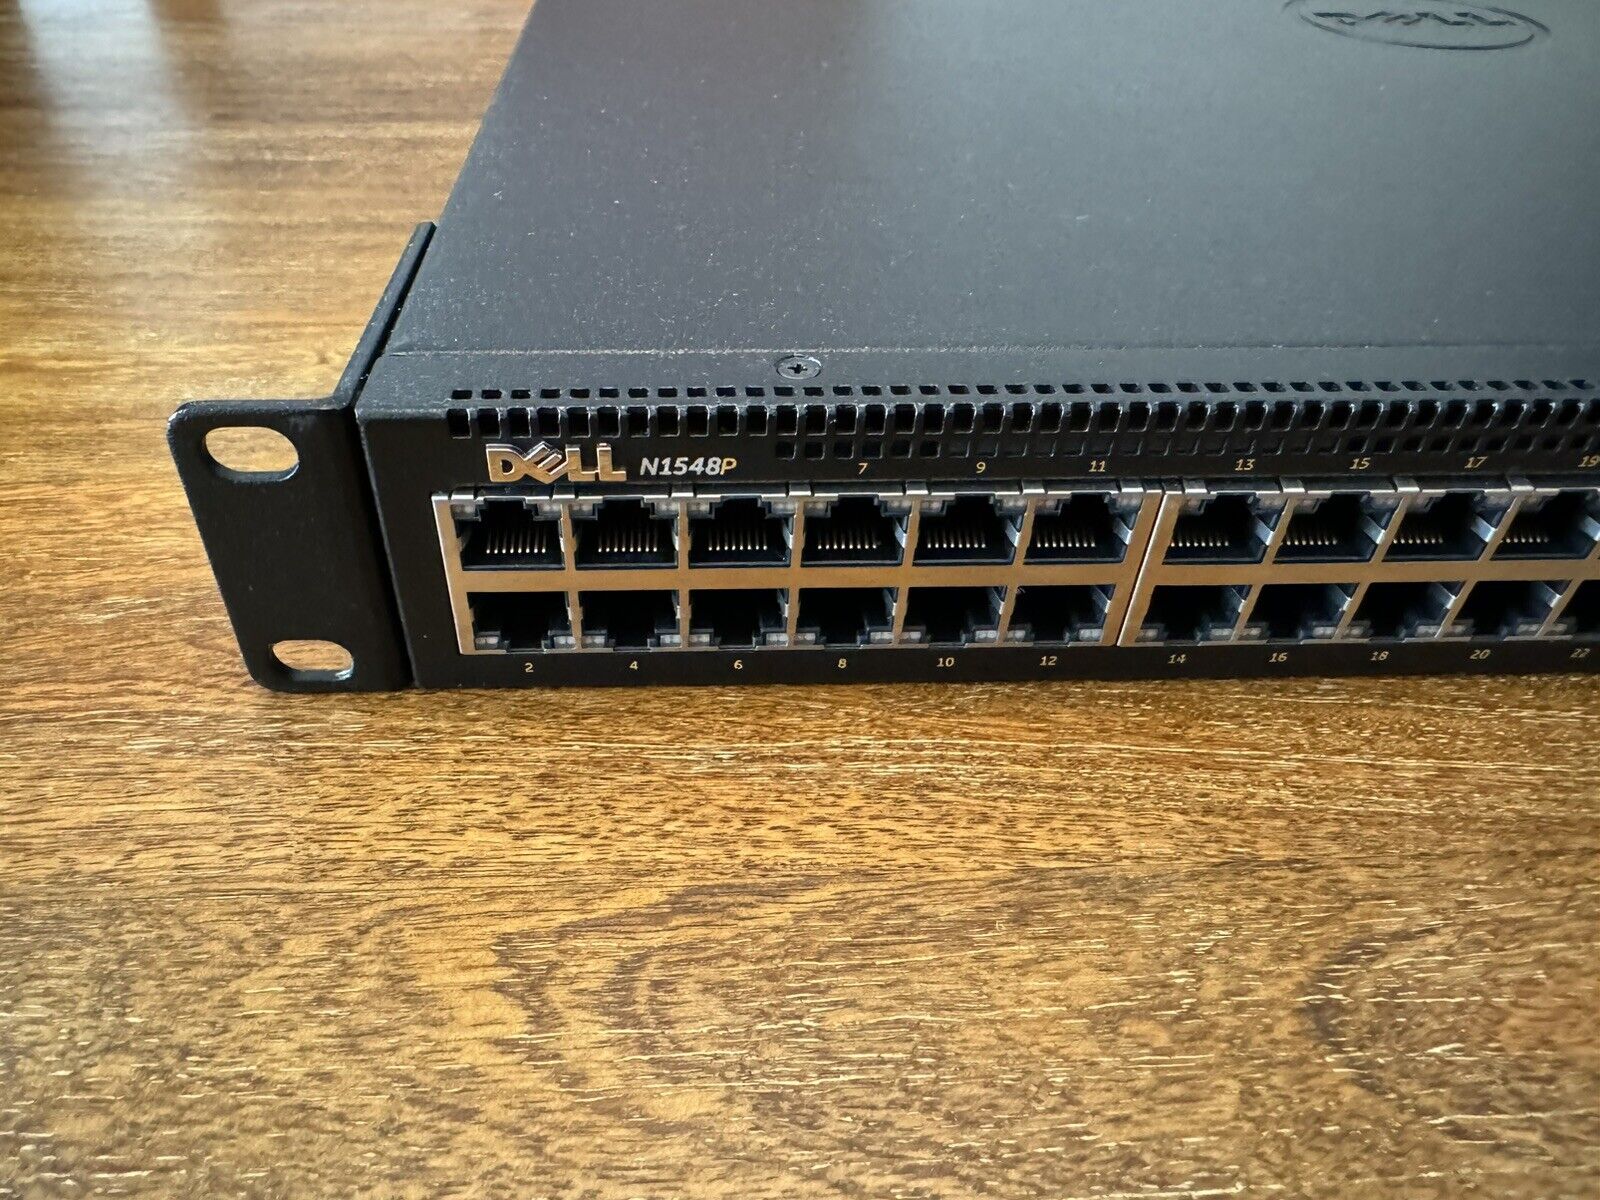 Dell N1548P 48 Port Gigabit 1GbE PoE+ 4P SFP+ Network Layer 3 Switch, PRE-OWNED.